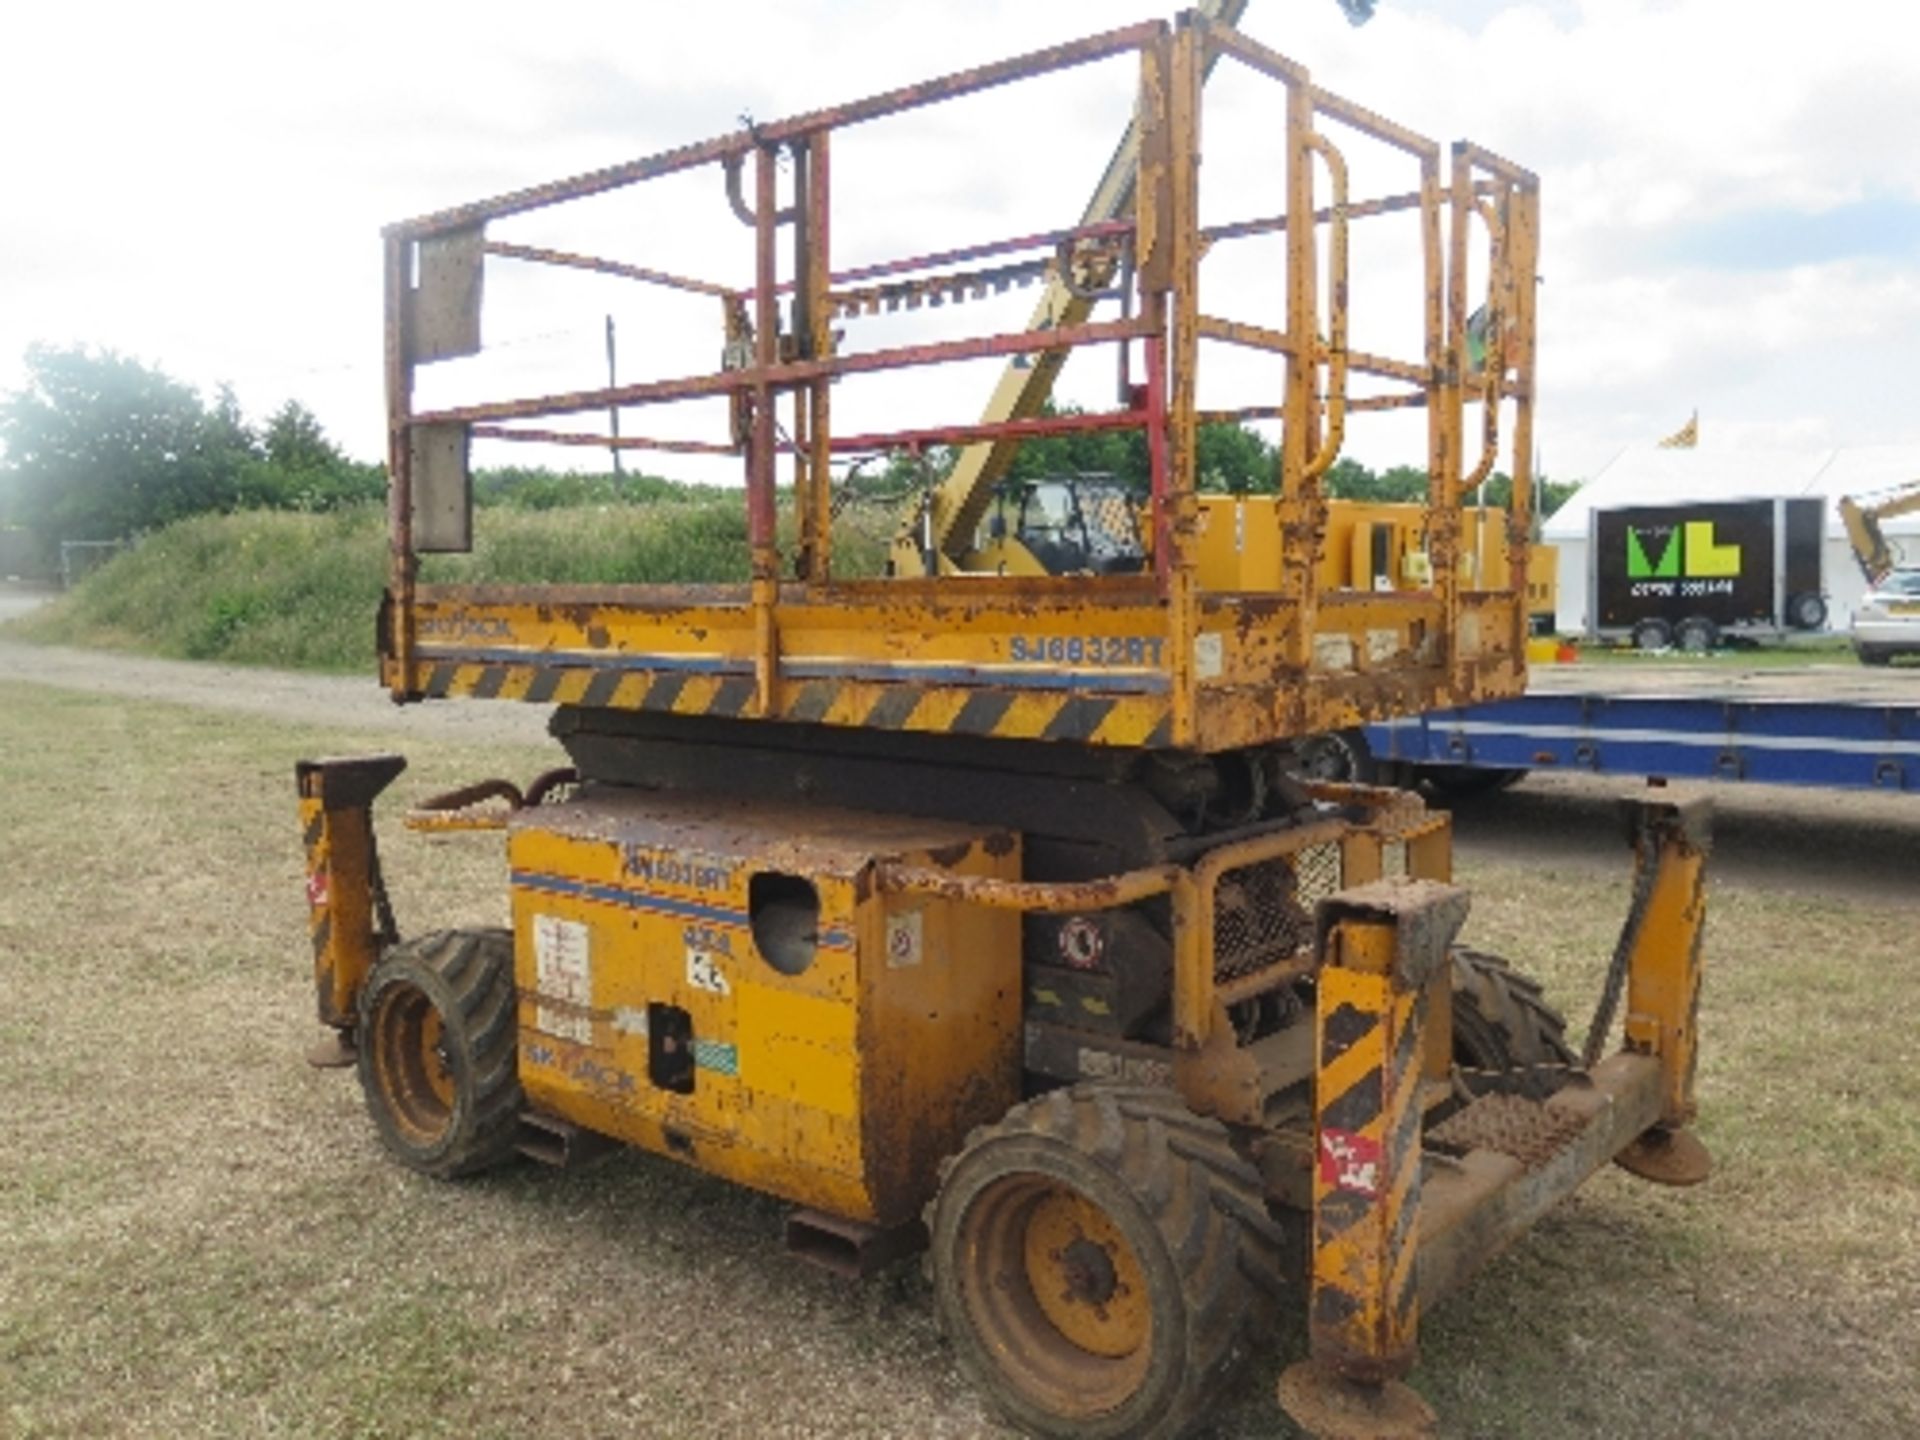 Skyjack 6832 scissor lift 155737
BELIEVED 2007
RUNS AND LIFTS
NO DRIVE
ALL LOTS are SOLD AS SEEN - Image 3 of 4